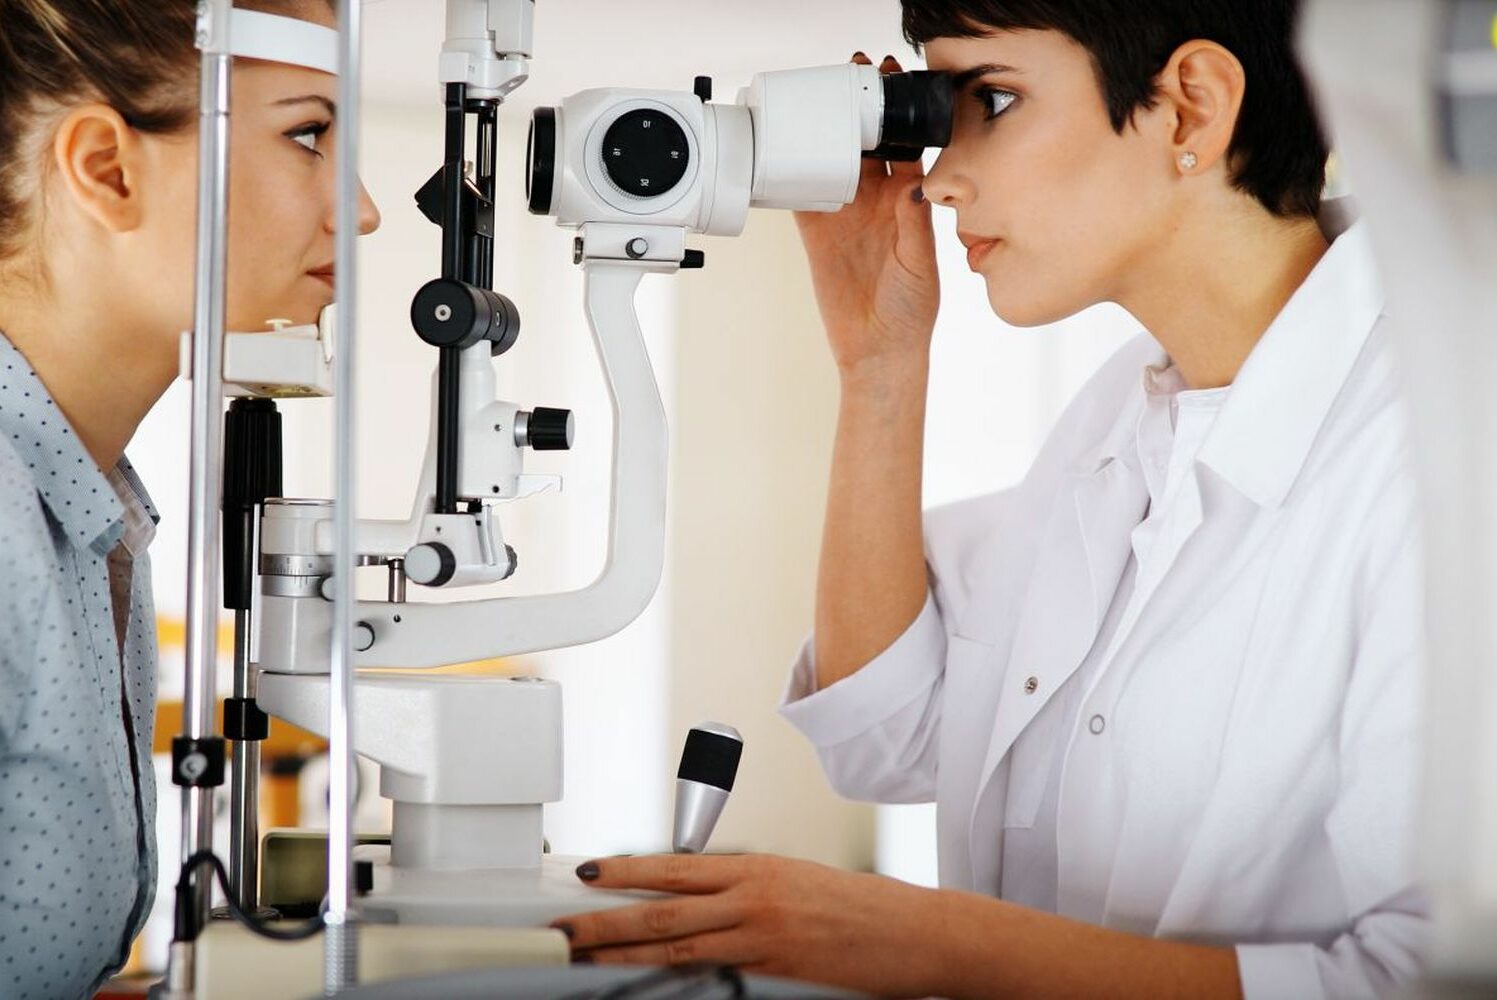 Bachelor of Vision Science